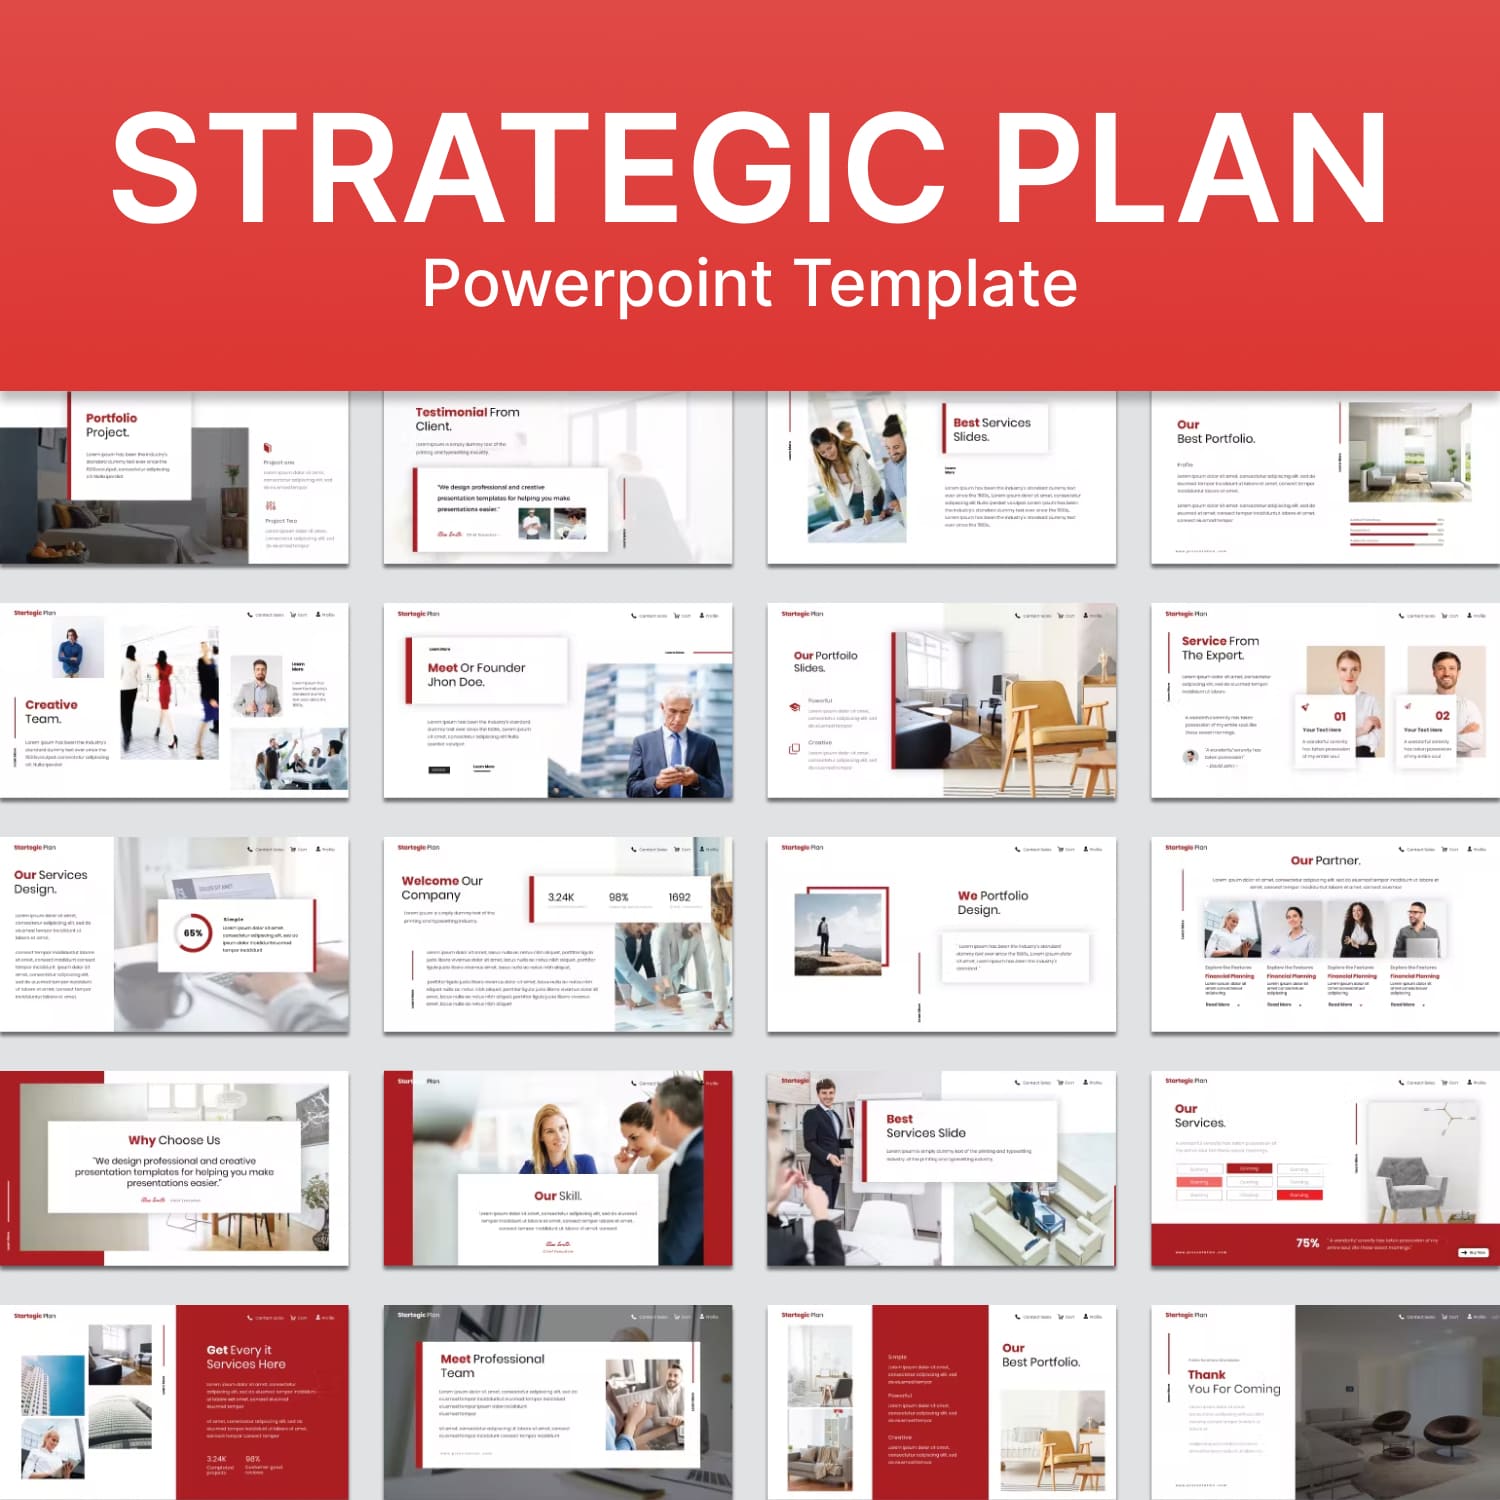 Strategic plan powerpoint v434 - main image preview.